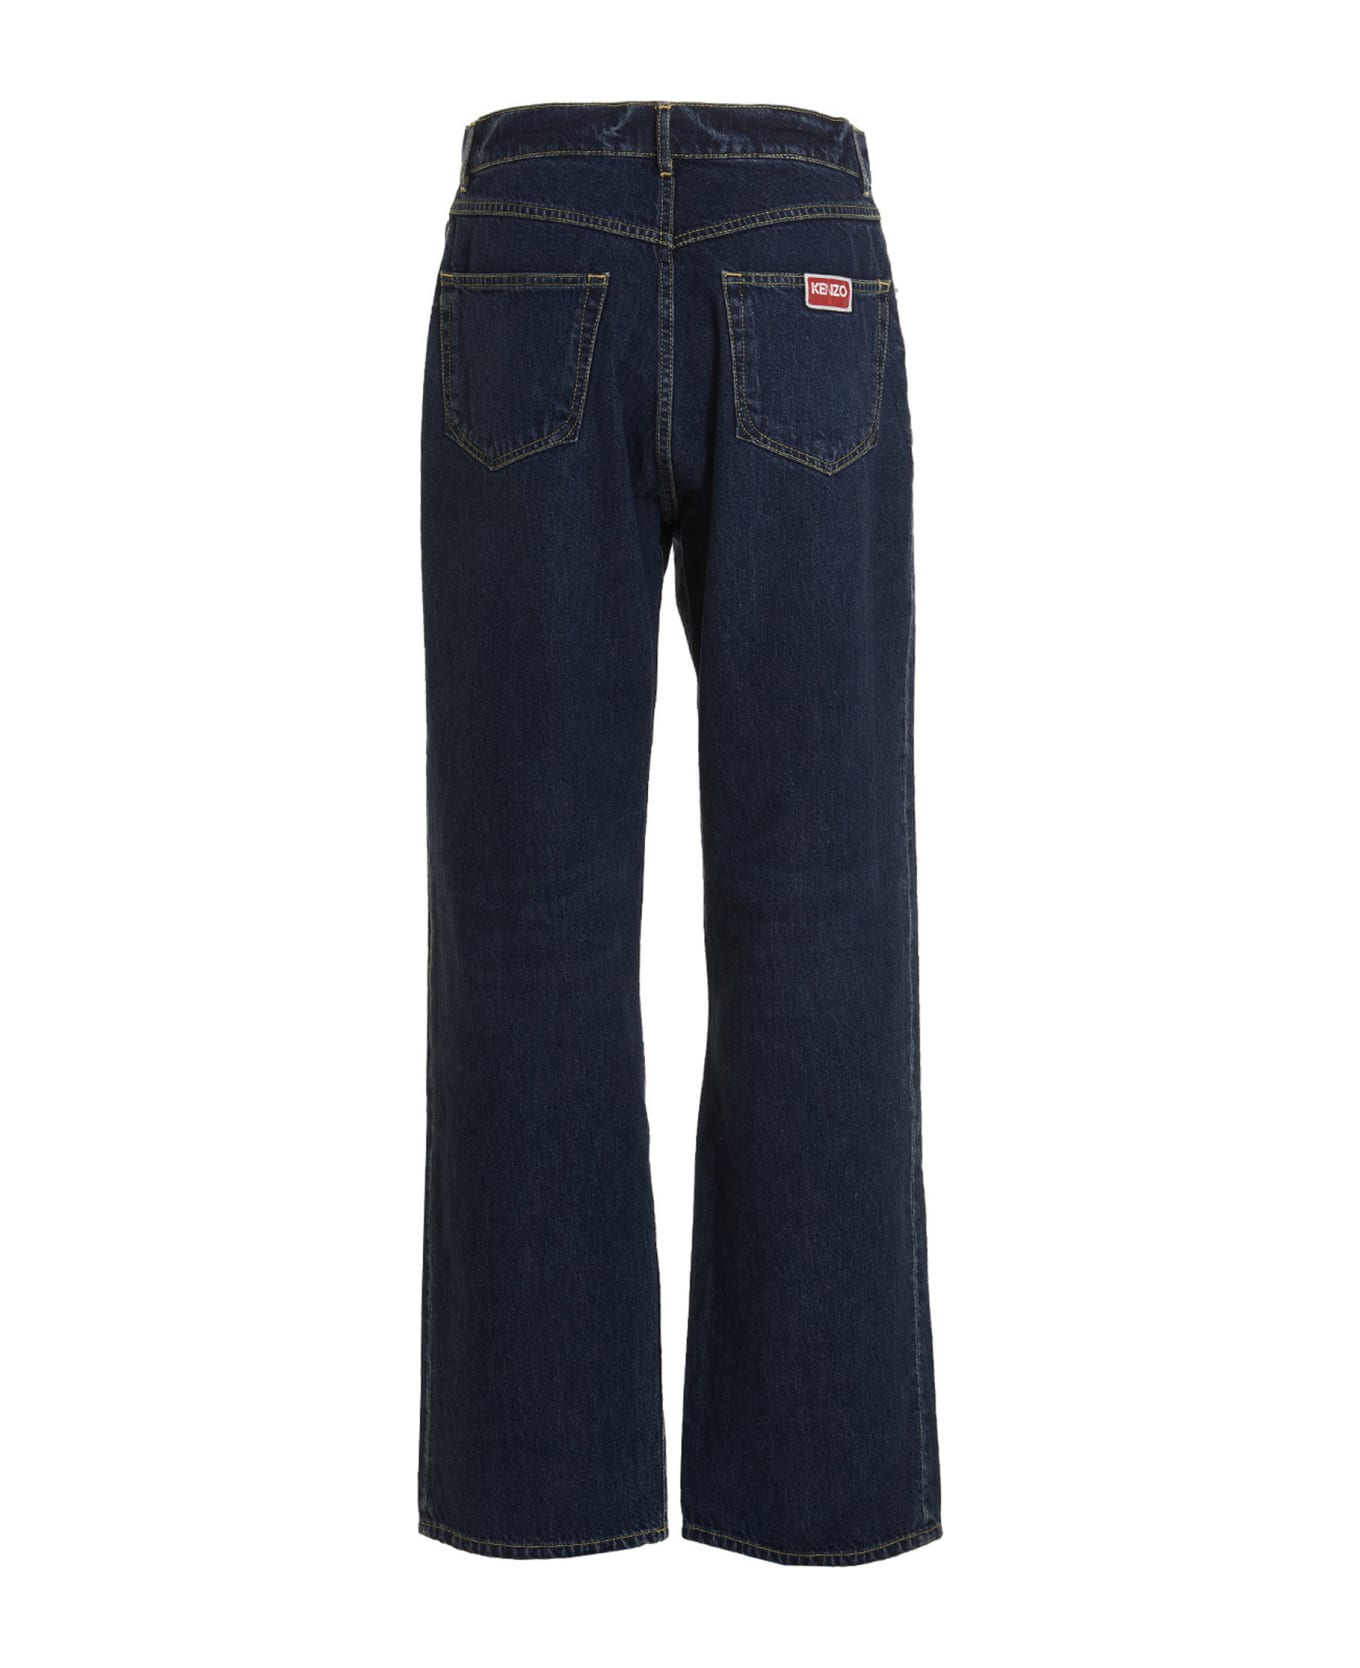 Kenzo Relaxed Fit Jeans - BLUE デニム